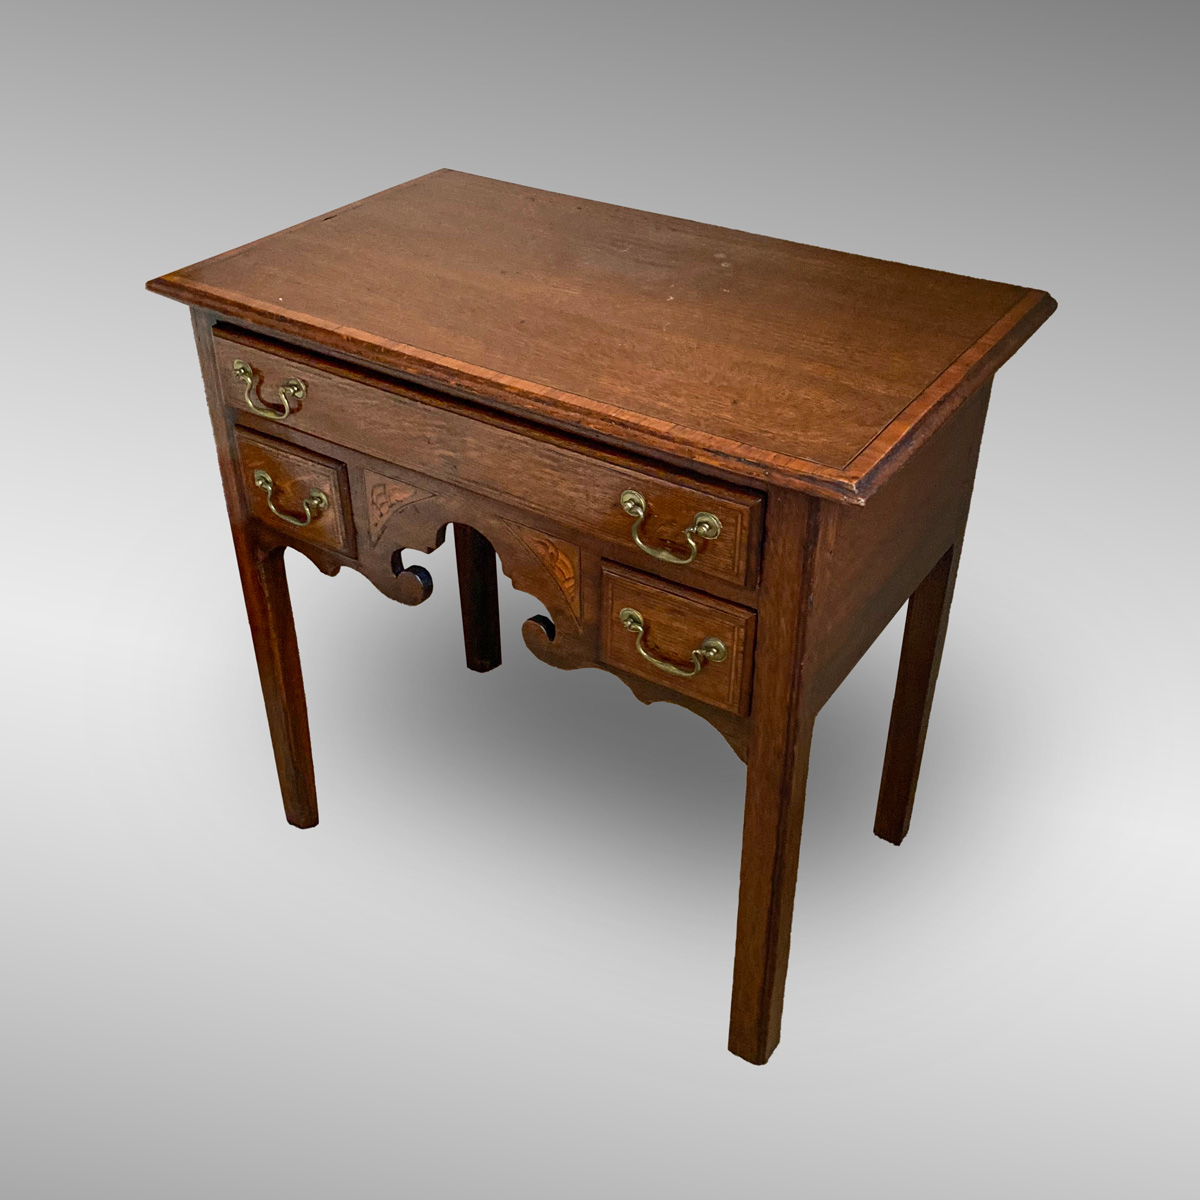 INLAID LOW BOY TABLE 3 Drawer 36d403